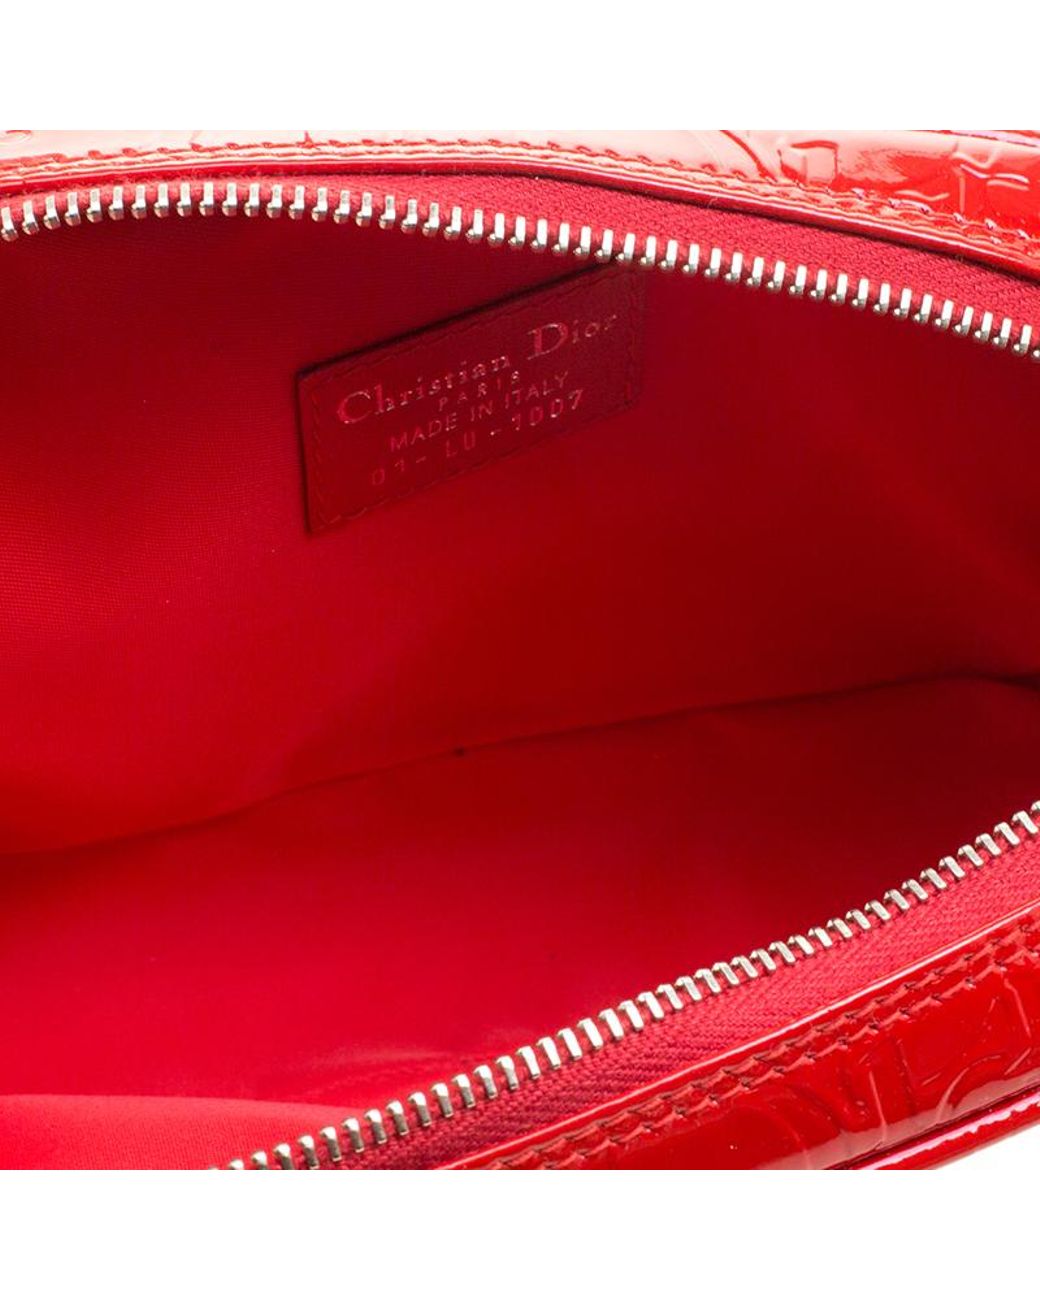 Red Patent Leather Trousse Cosmetic Bag